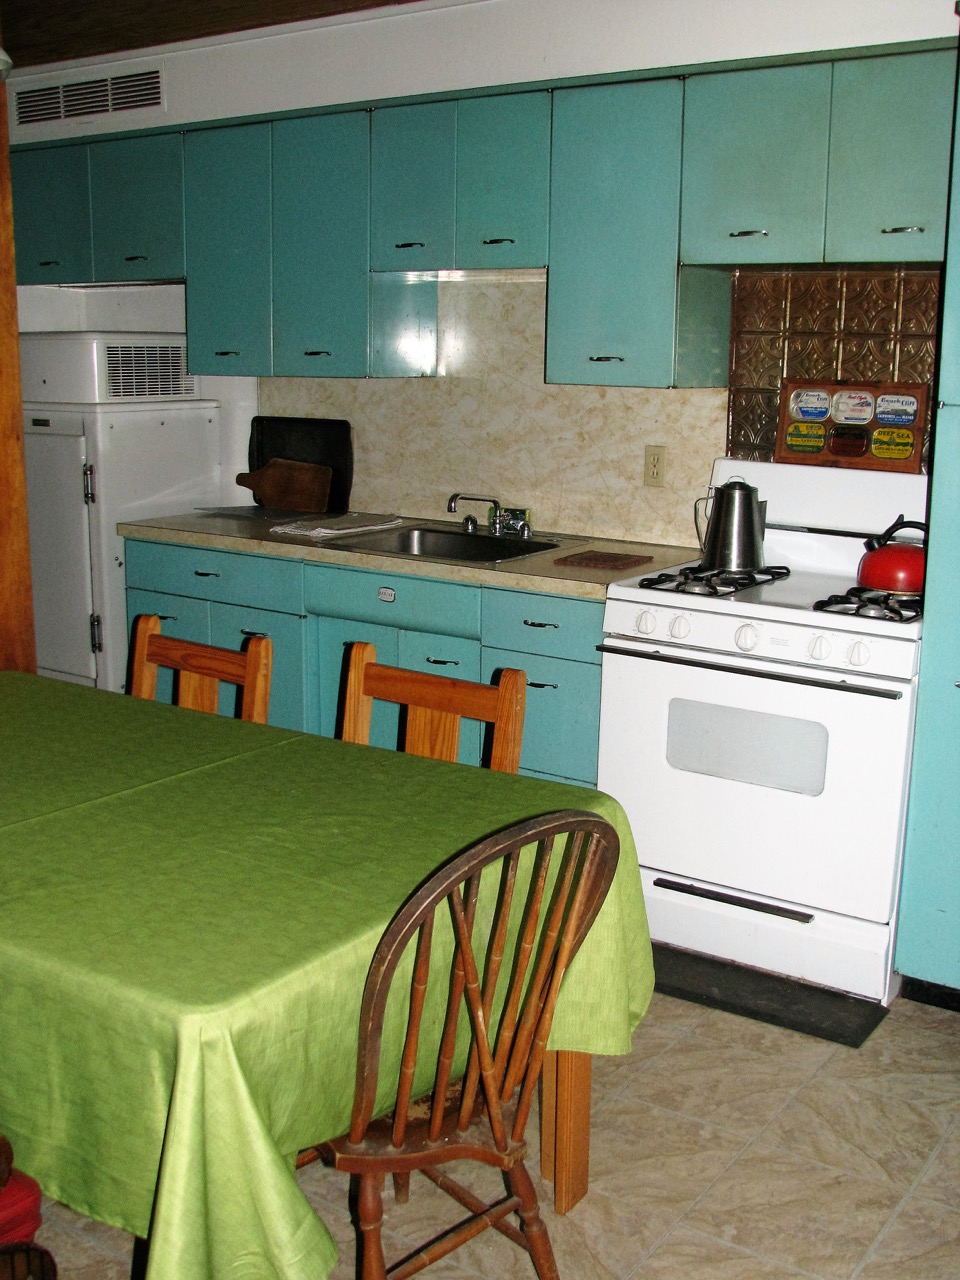 Kitchen in the North Housekeeping Lodge